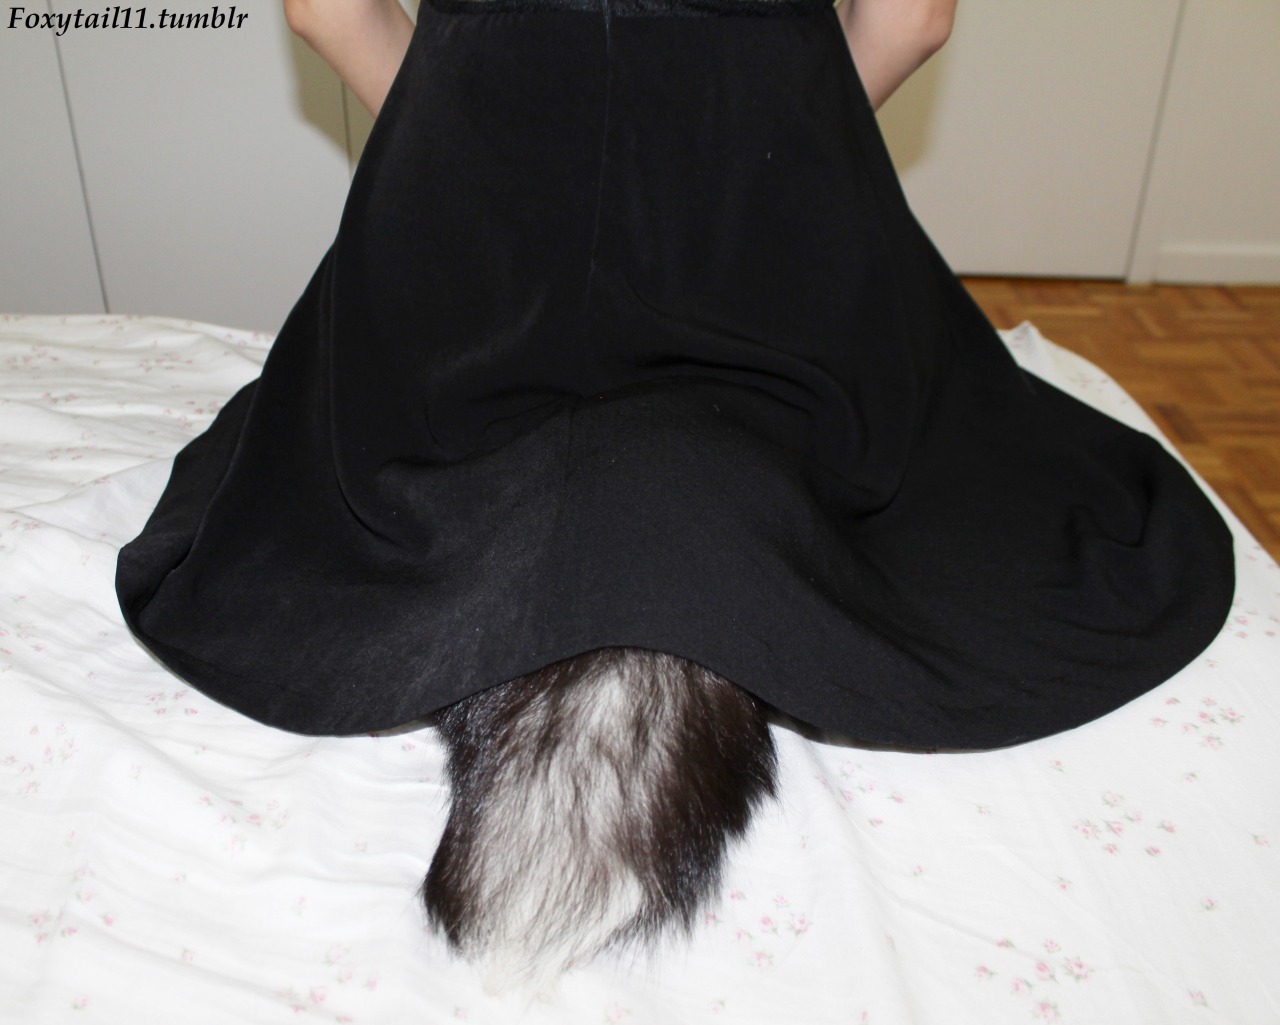 foxytail11:  My fox tail peeping out of my dress hehe.  It was a fun night at the